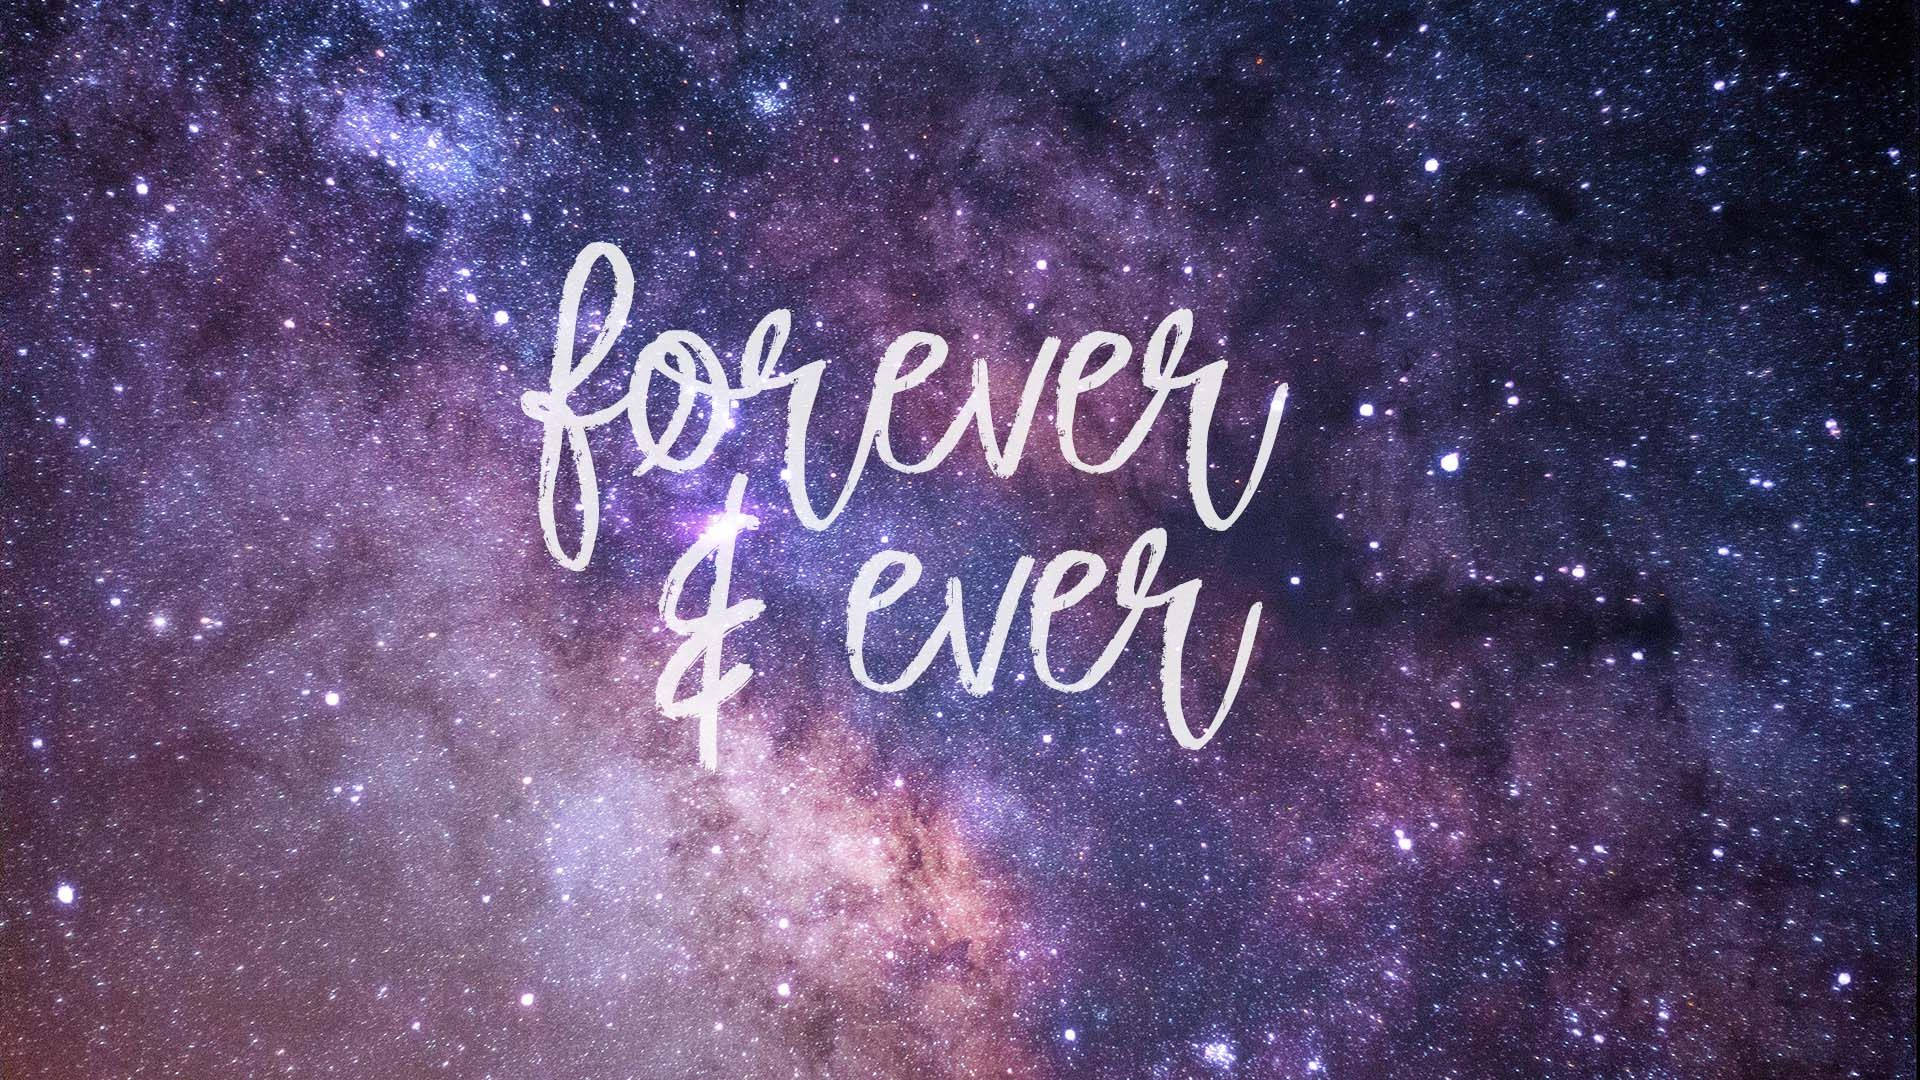 Cute Galaxy With Forever & Ever Wallpaper